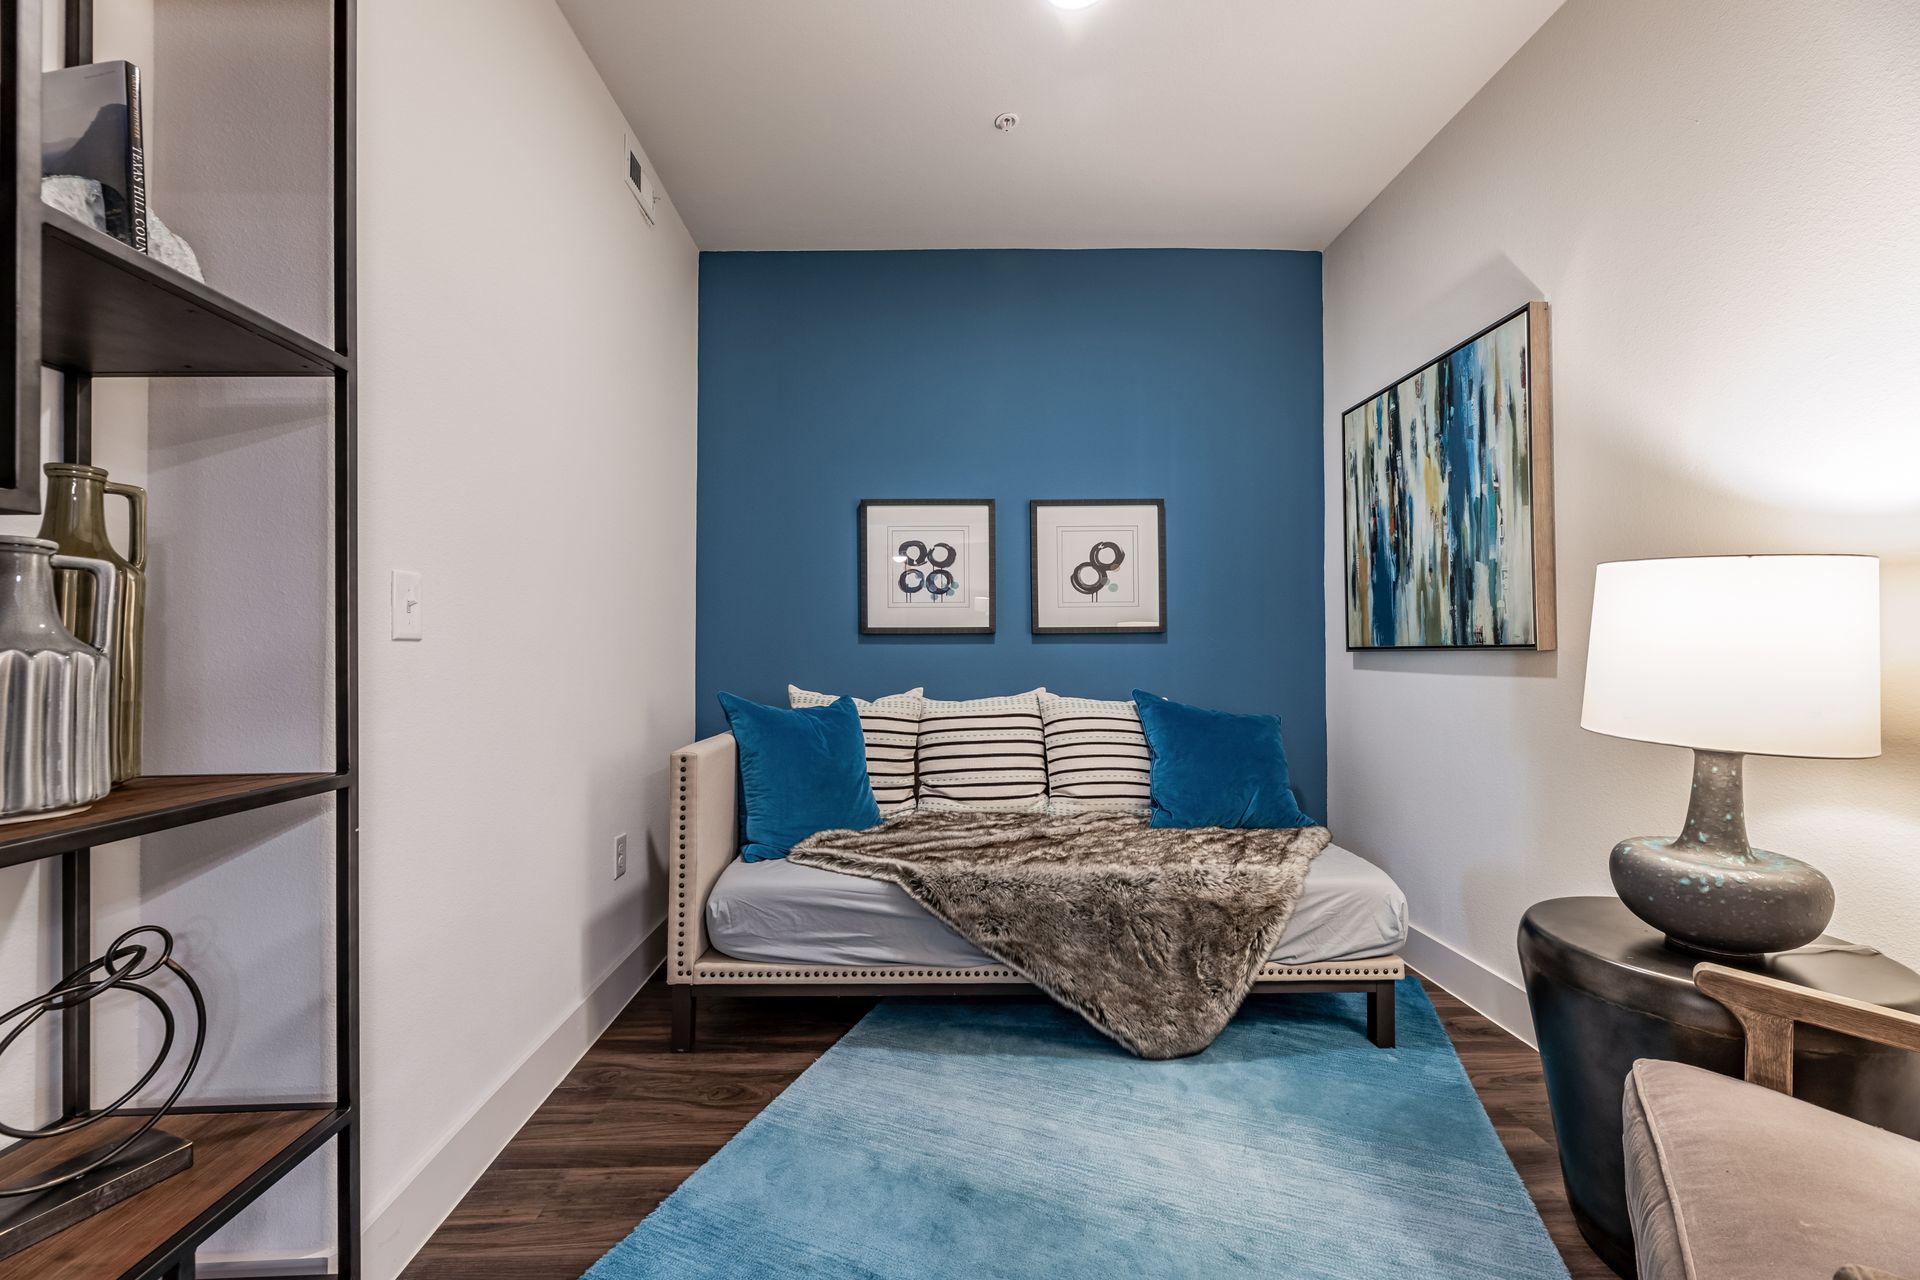 Guest room with a blue wall and a bed at Parkside at Craig Ranch.